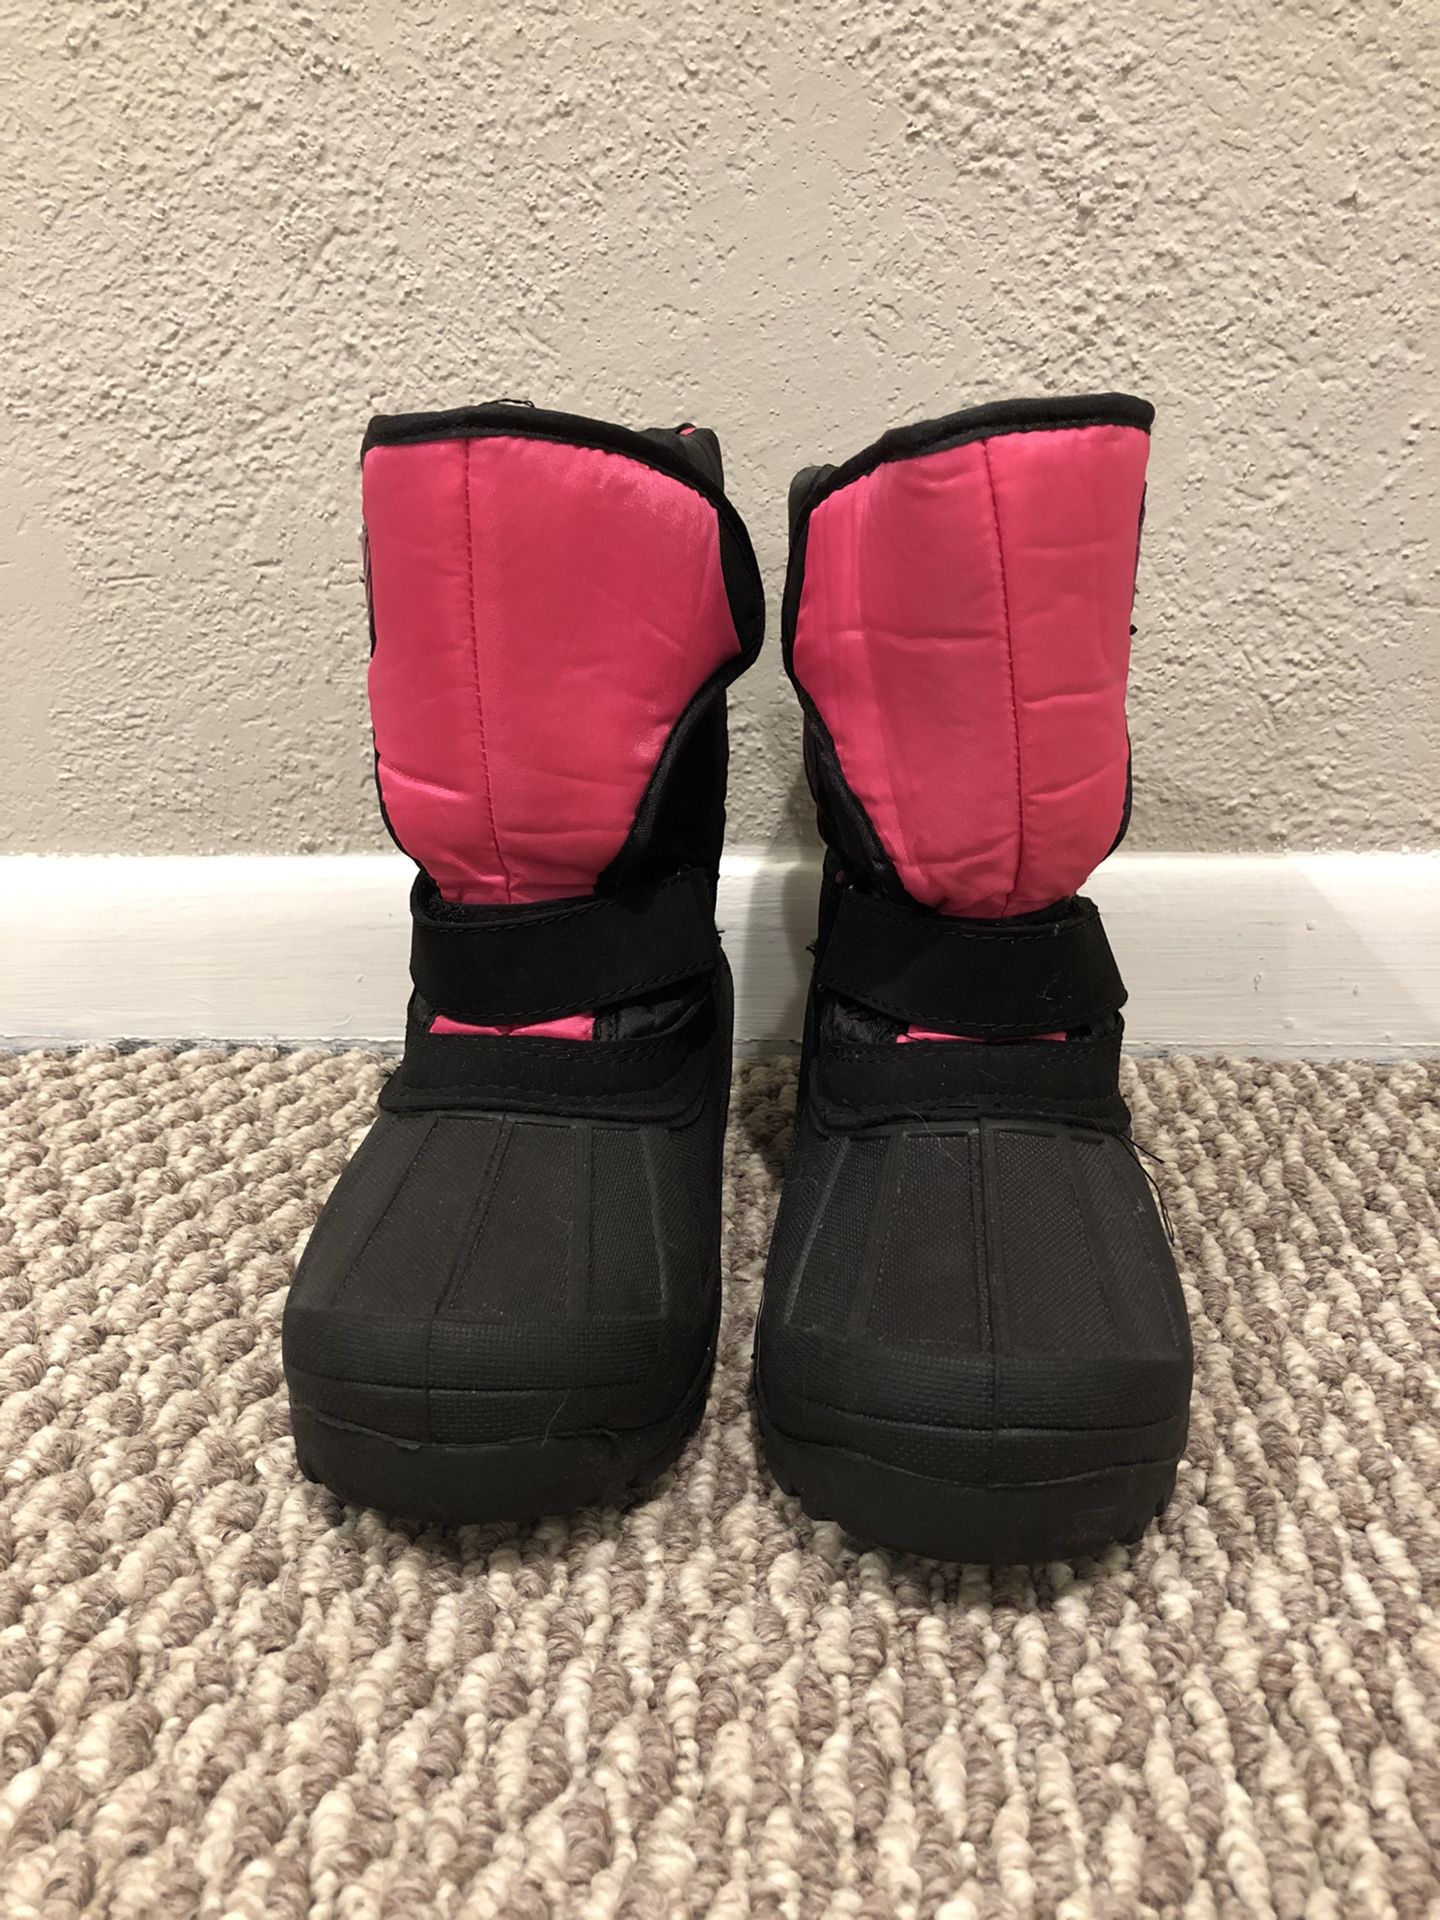 Winter / snow boots - kids size 2